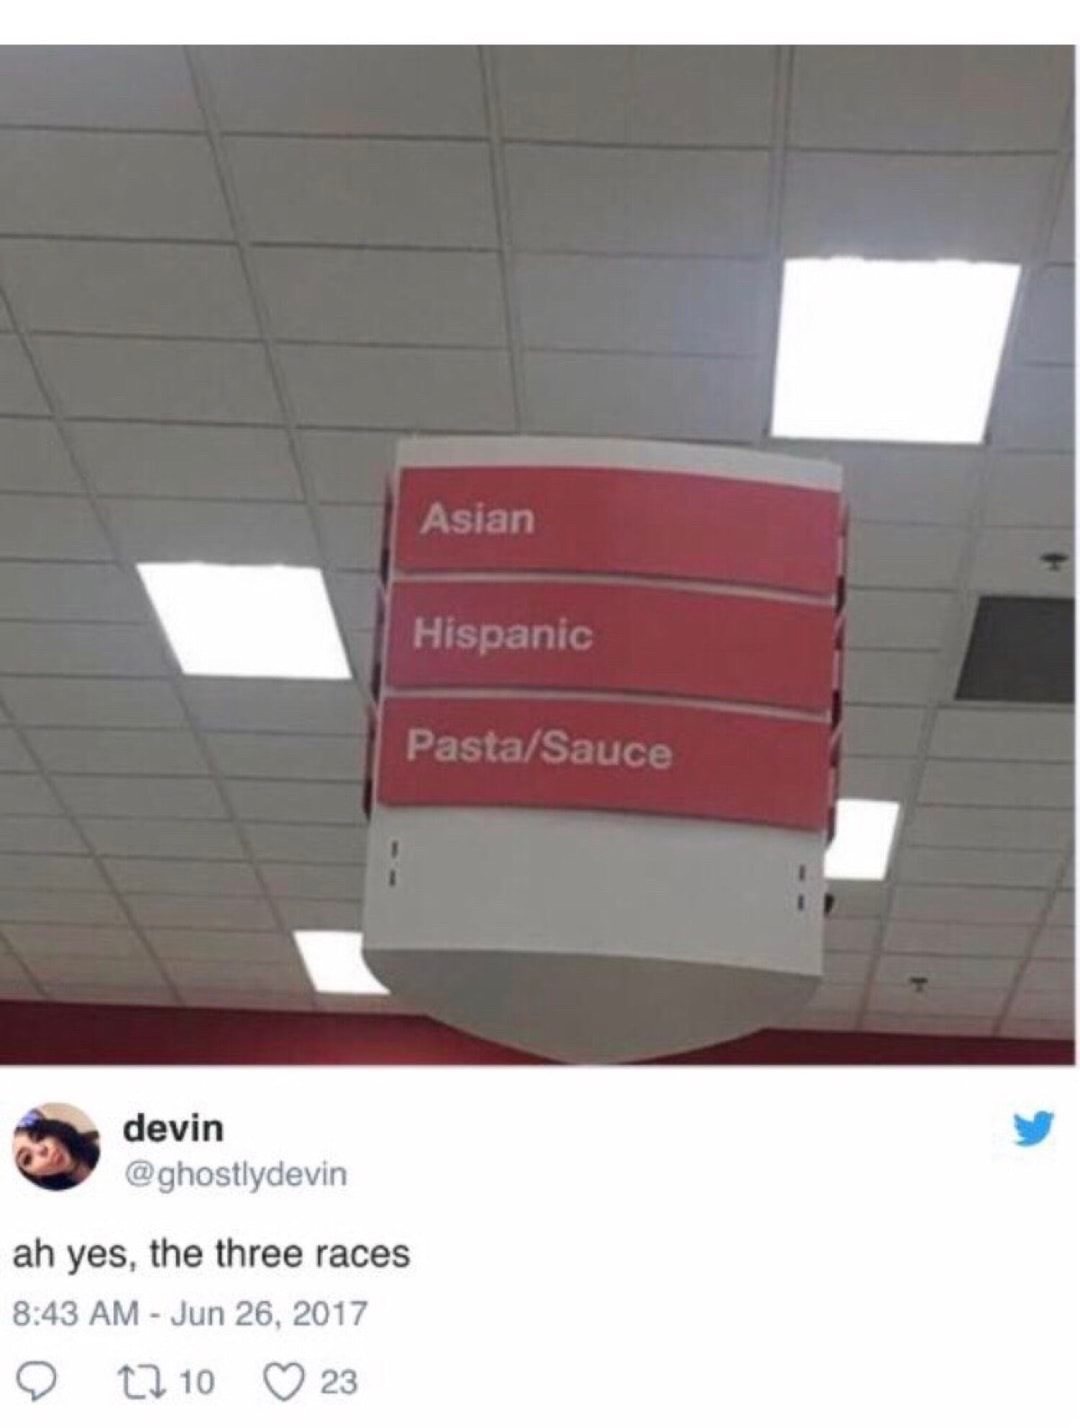 angle - Asian Hispanic PastaSauce devin devin ah yes, the three races 22 10 23